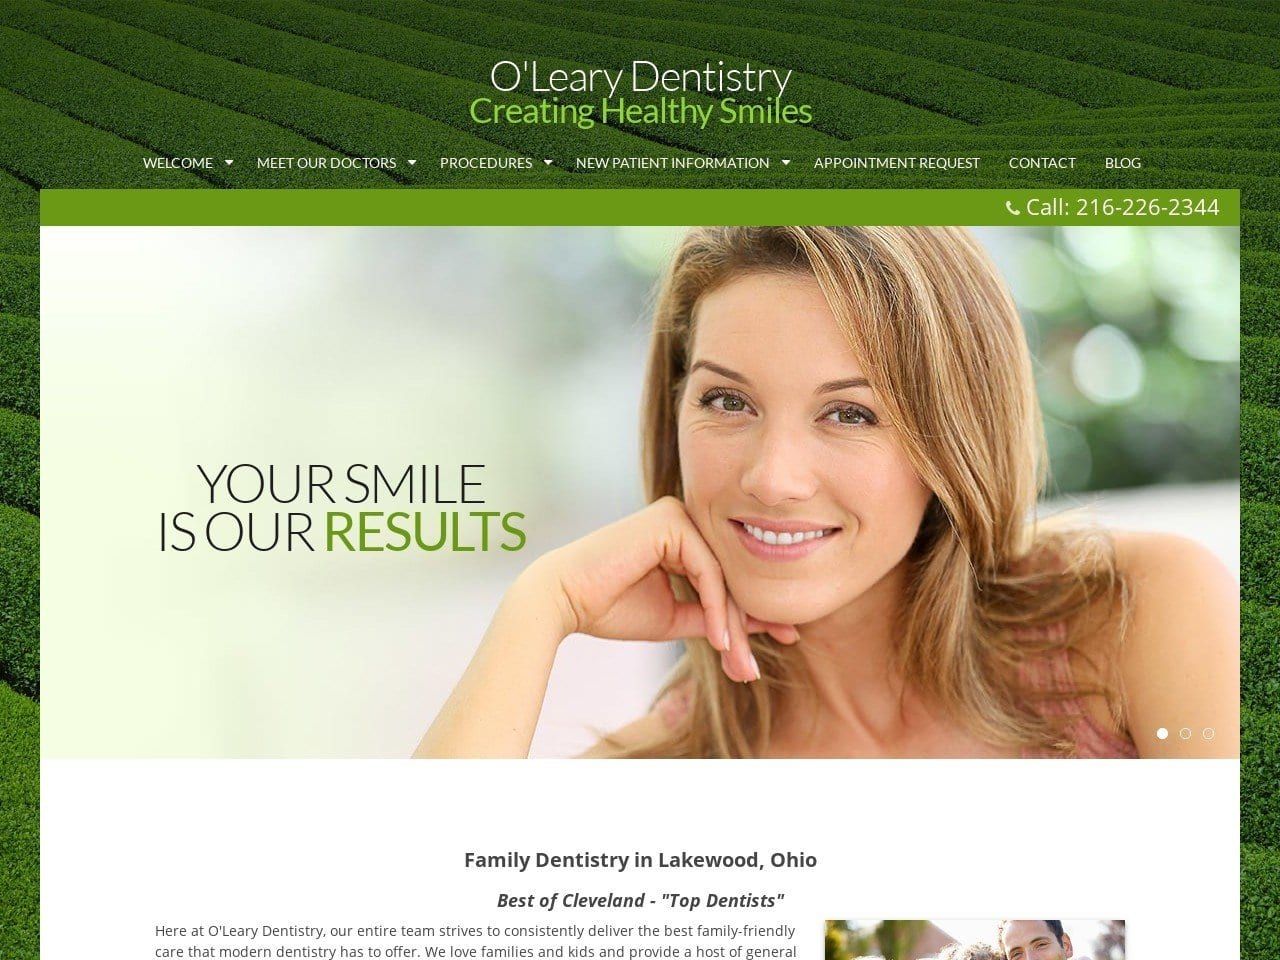 Michael E Oleary DDS Website Screenshot from olearydentistry.com